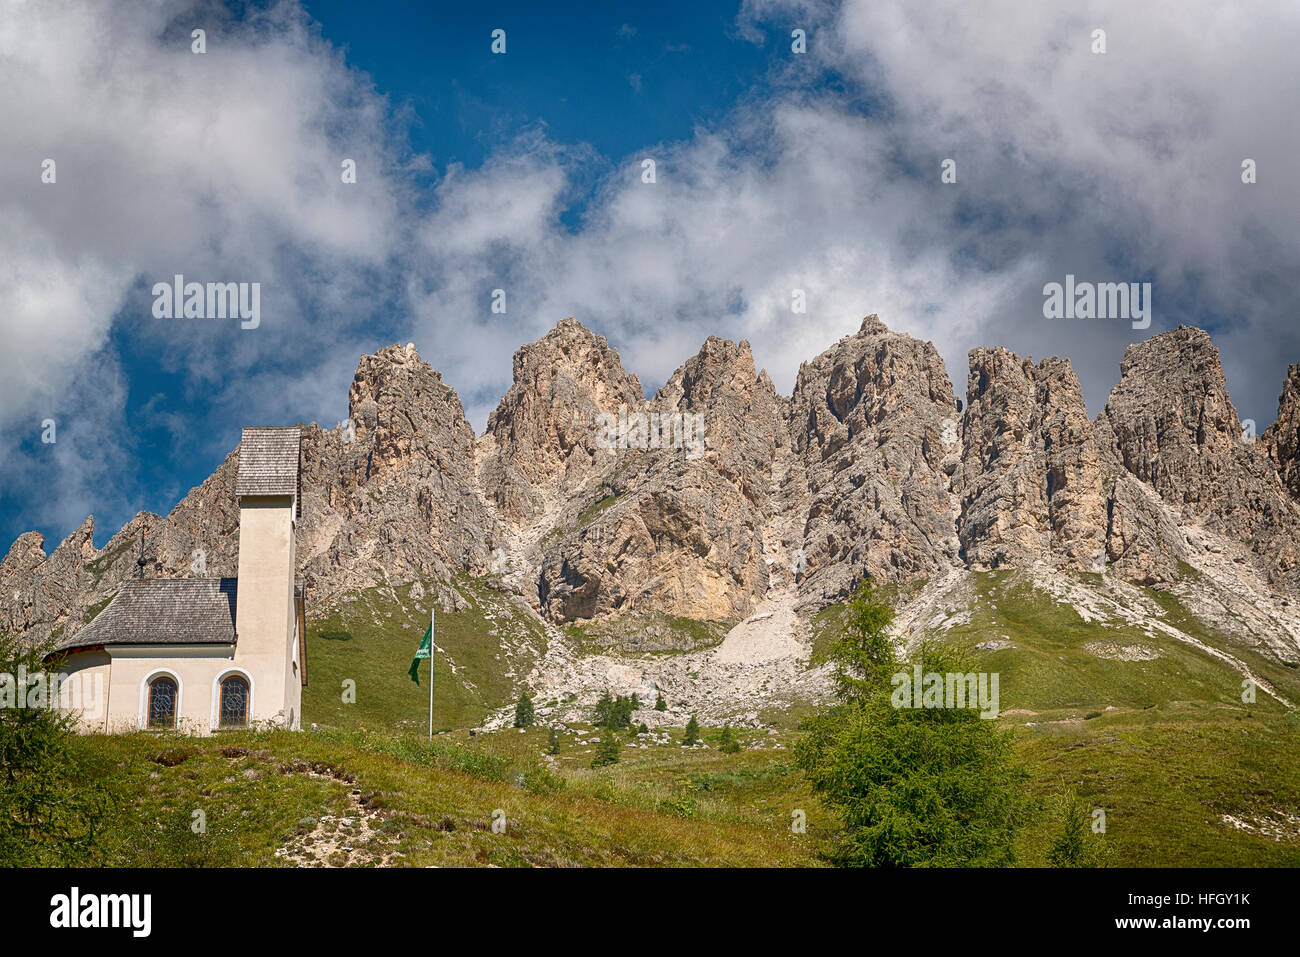 Little Church at the Gardena Pass with mountains of Cir Group in the background, Dolomites Stock Photo